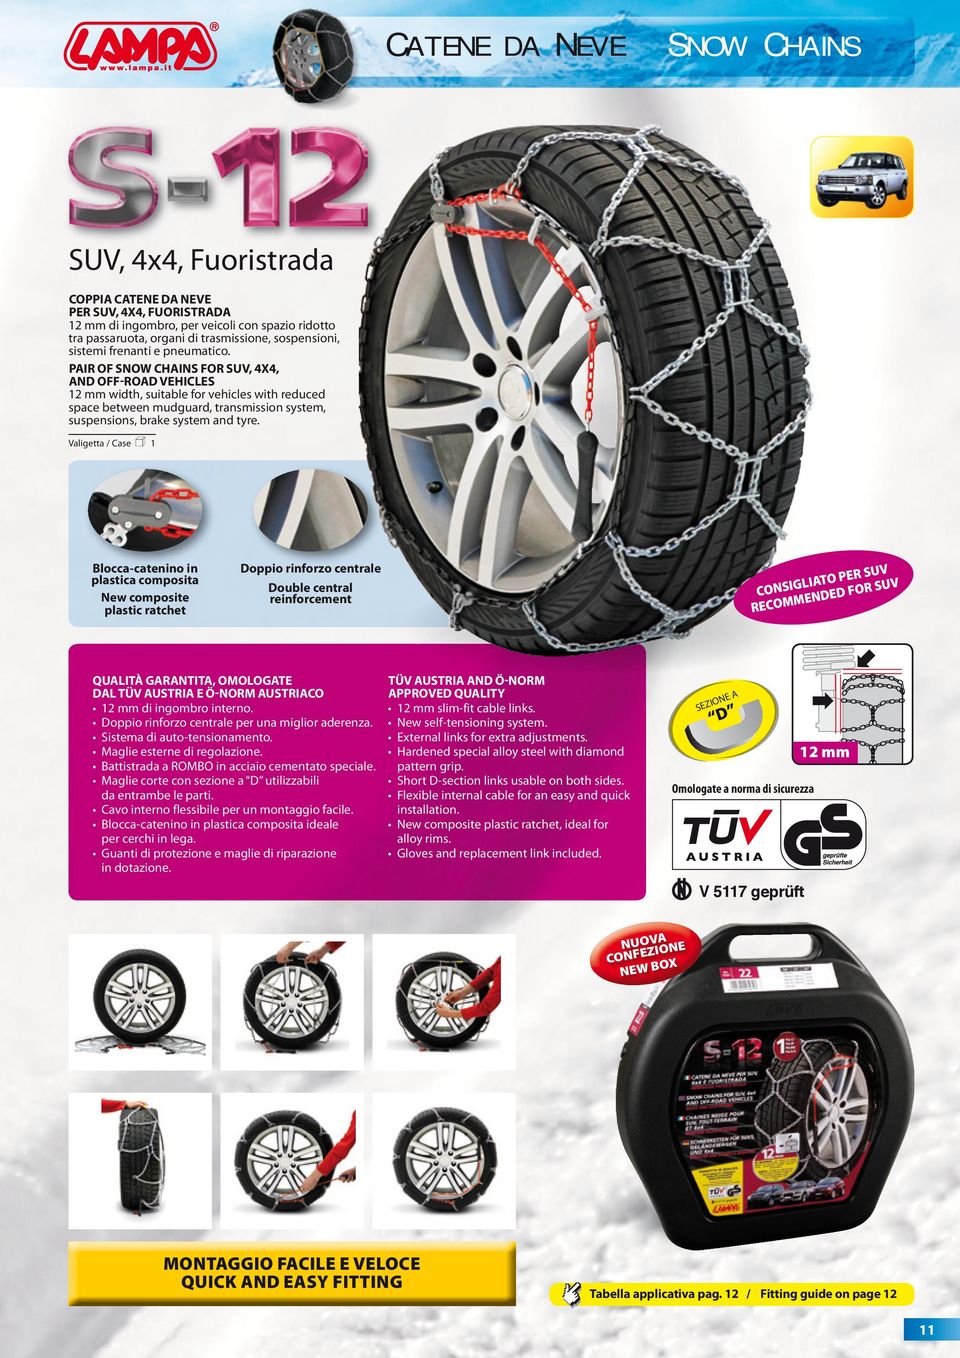 PAIR OF SNOW CHAINS FOR SUV, 4X4, AND OFF-ROAD VEHICLES 12 mm width, suitable for vehicles with reduced space between mudguard, transmission system, suspensions, brake system and tyre.